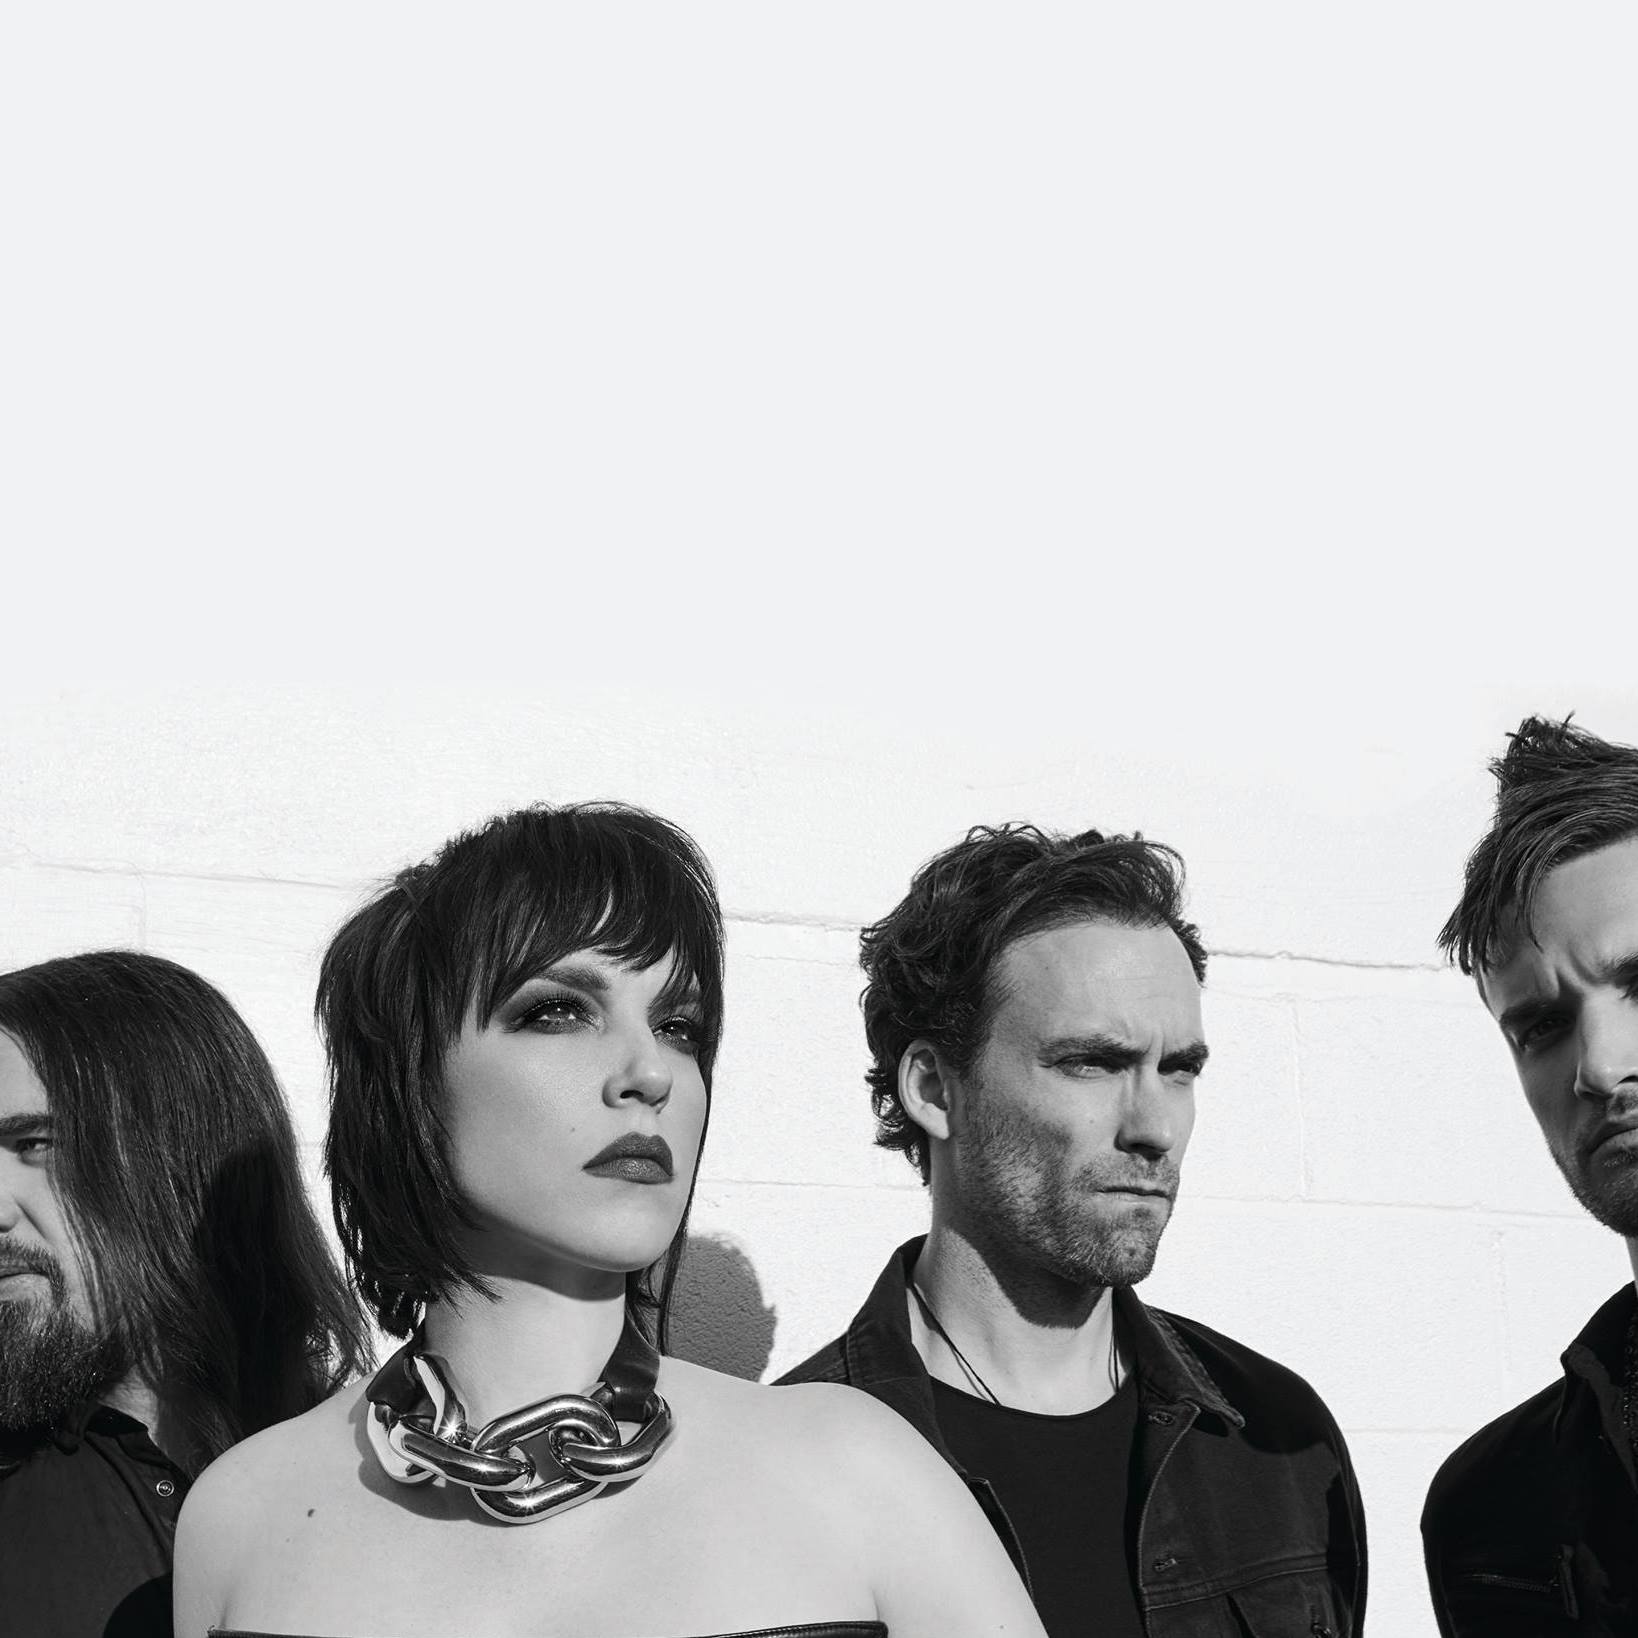 Halestorm are “Uncomfortable” with new video